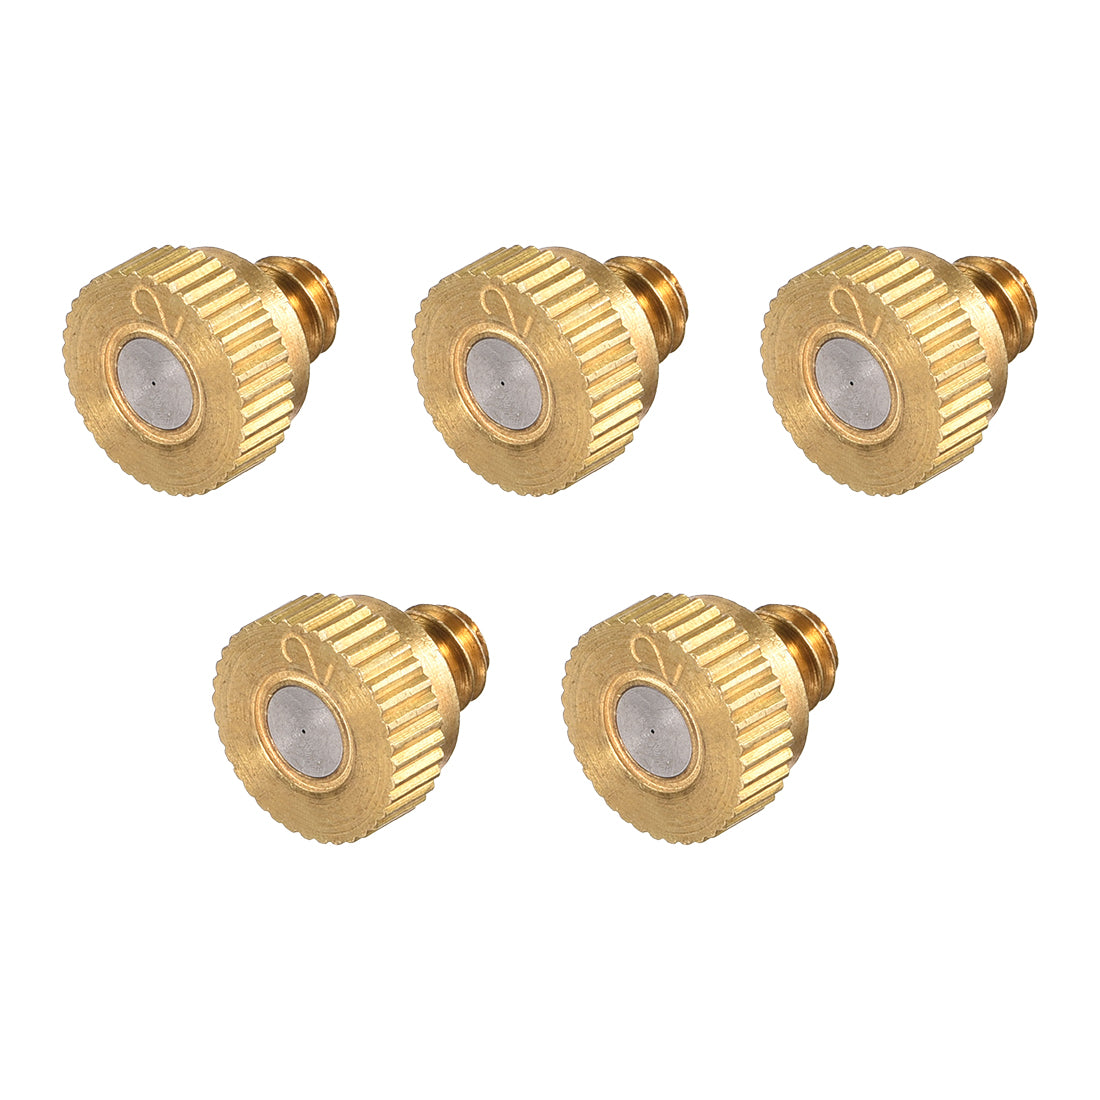 uxcell Uxcell Brass Misting Nozzle - 10/24 UNC 0.2mm Orifice Dia Replacement Heads for Outdoor Cooling System - 5 Pcs